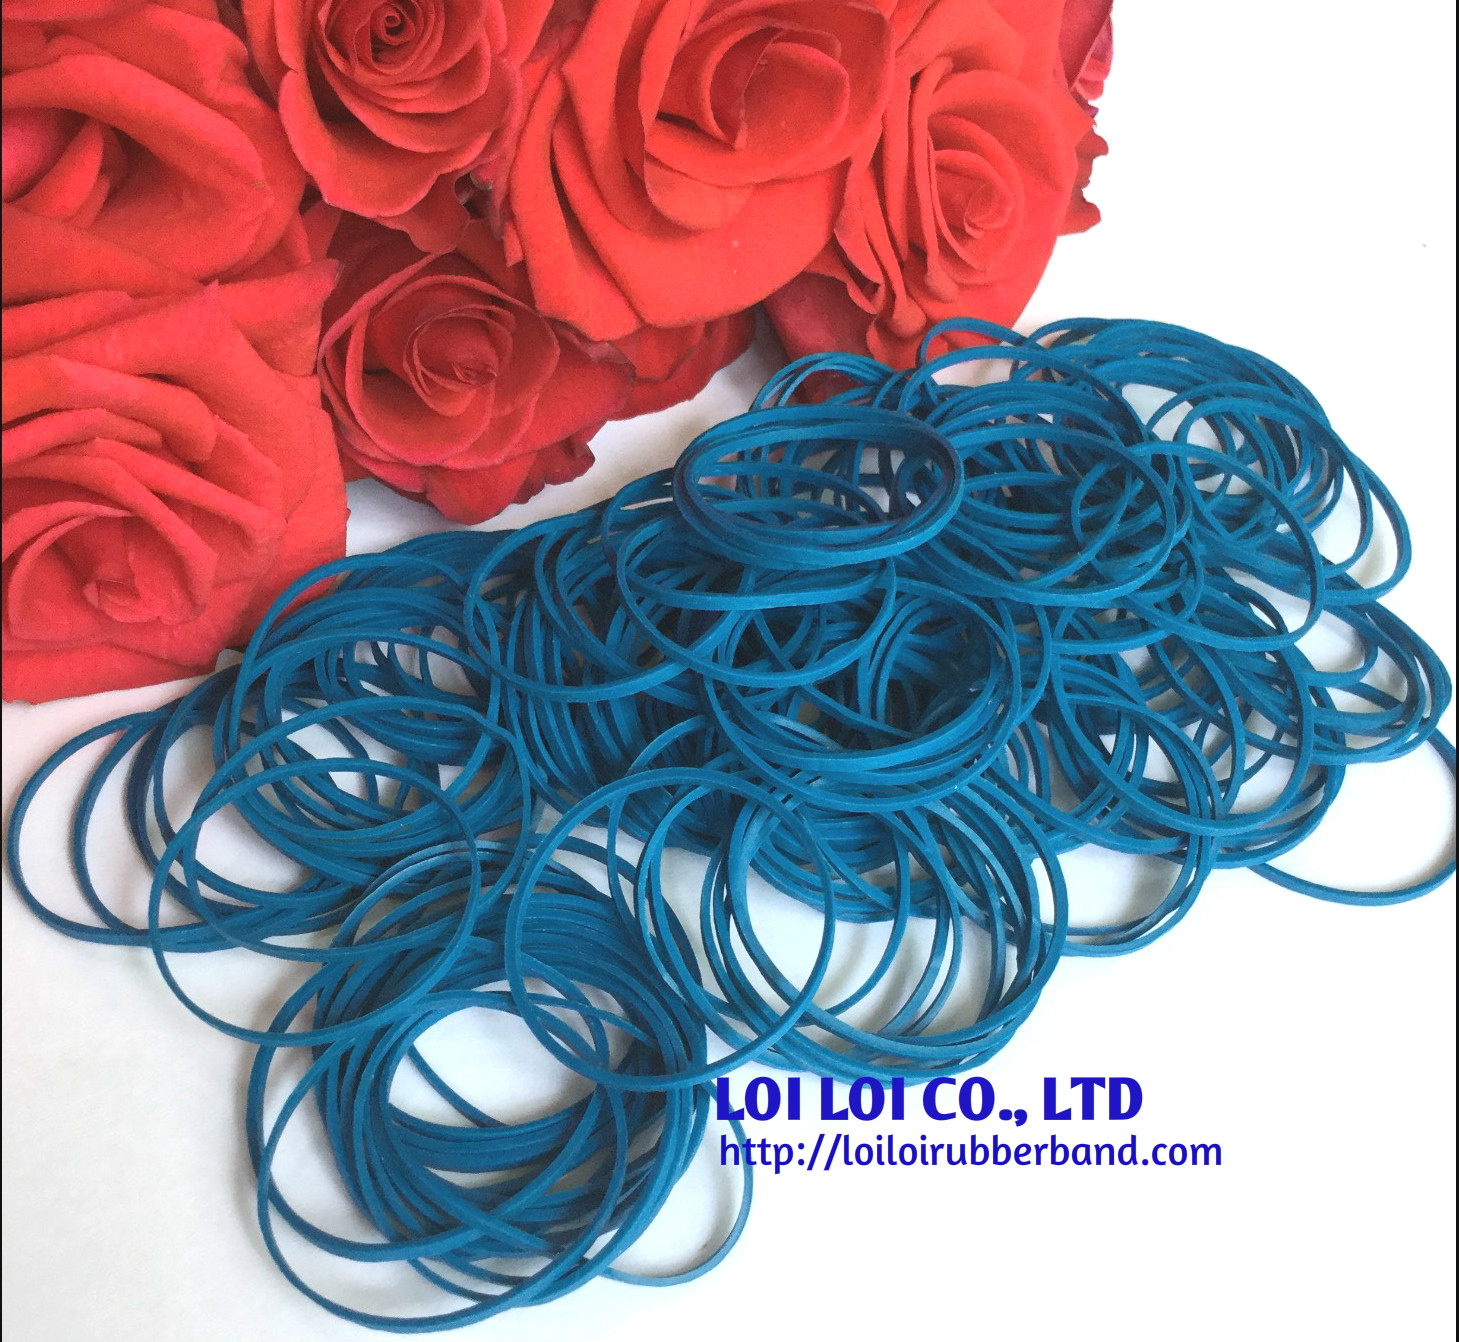 Most popular Cheap price Blue natural Rubber band use for vegetable or tie flower from Factory in Vietnam